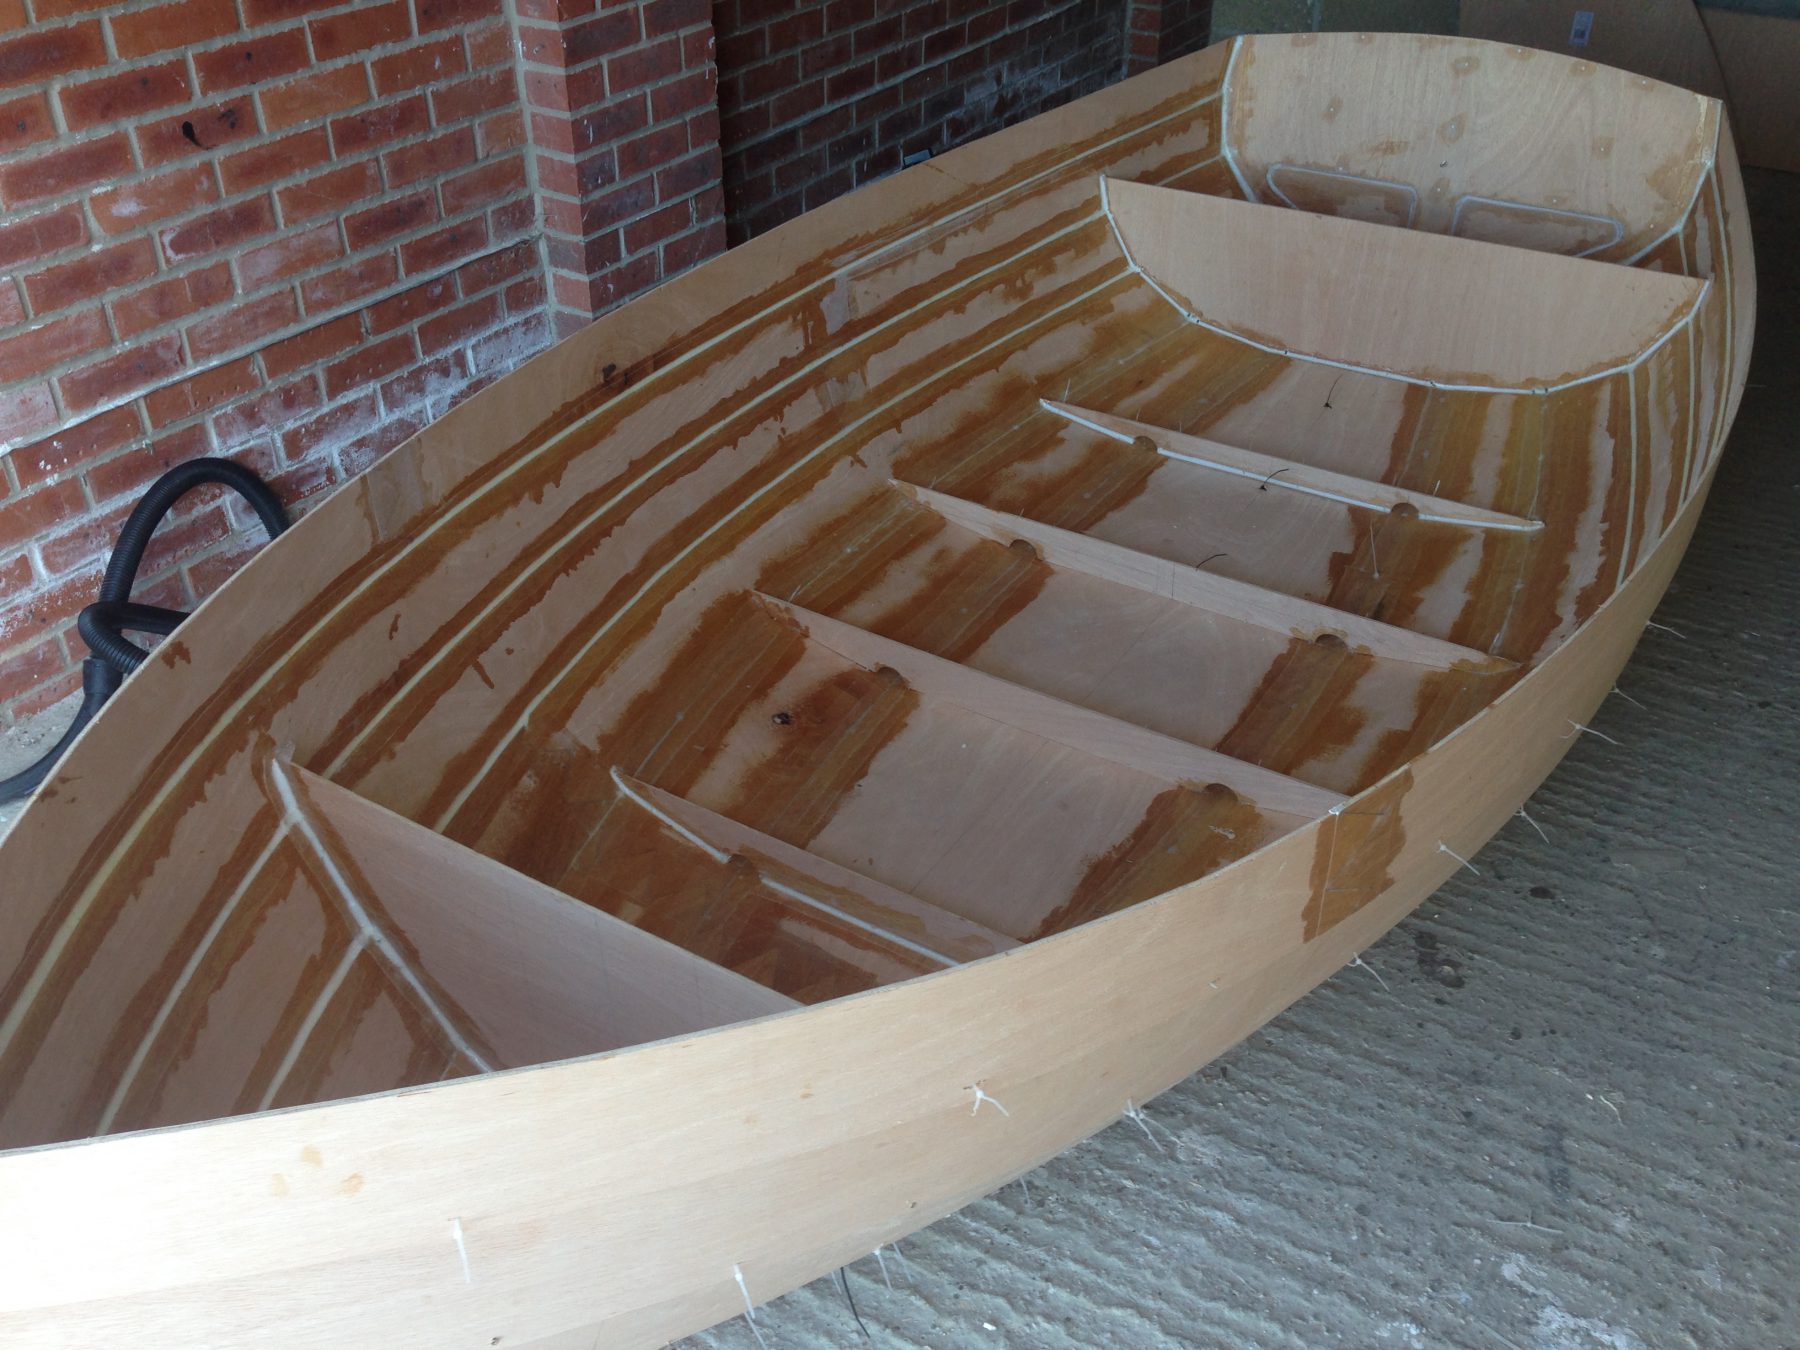 TRADE SECRET: Wooden boat repairs – replacing damaged plywood sections